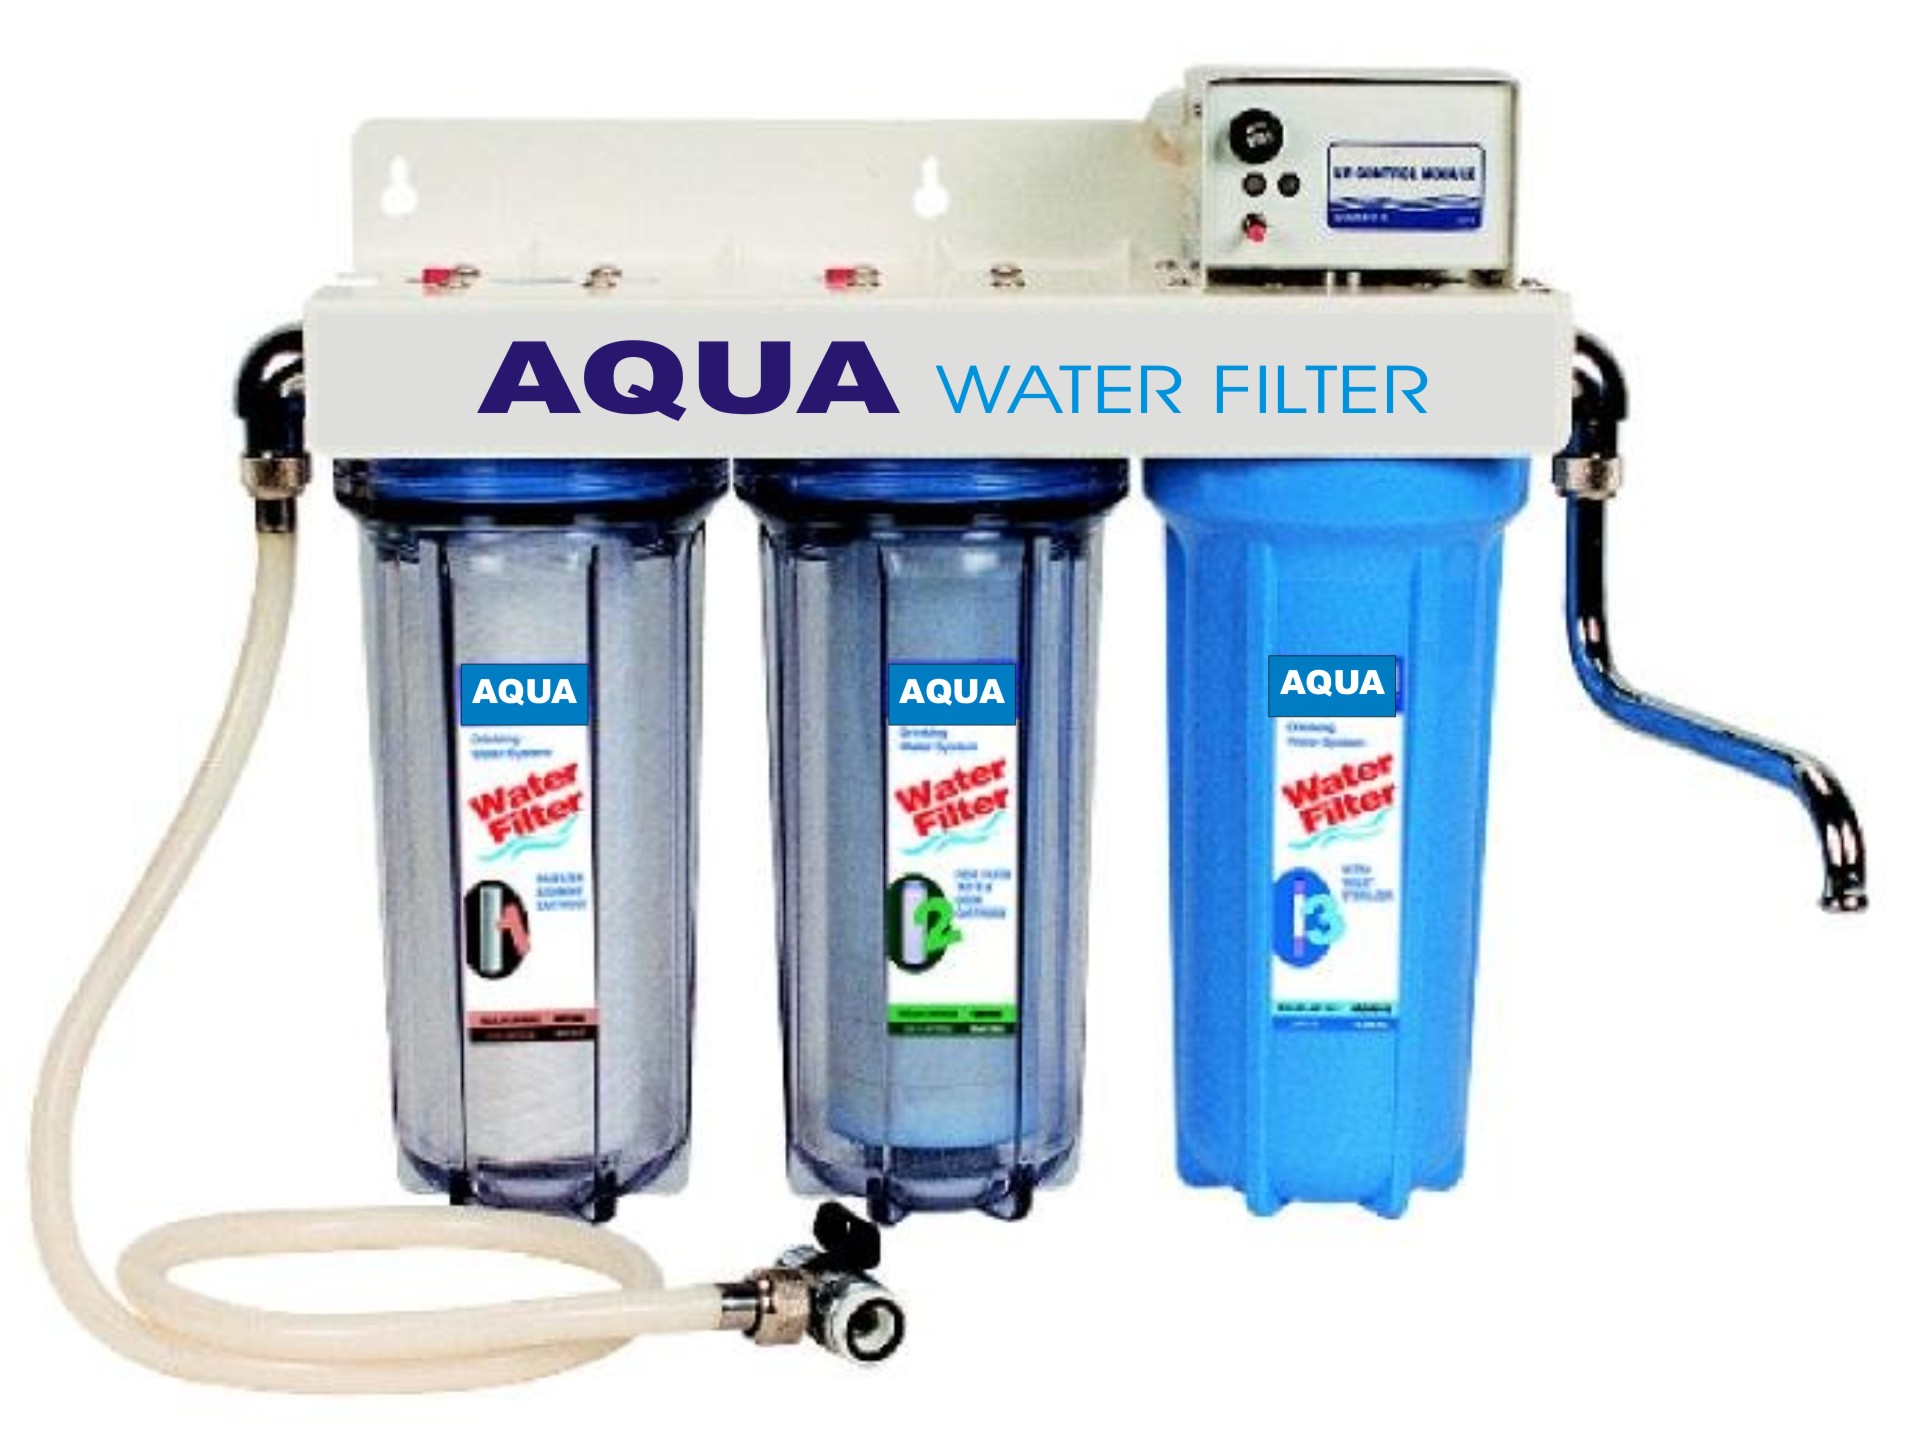 water filter for home use price in pakistan